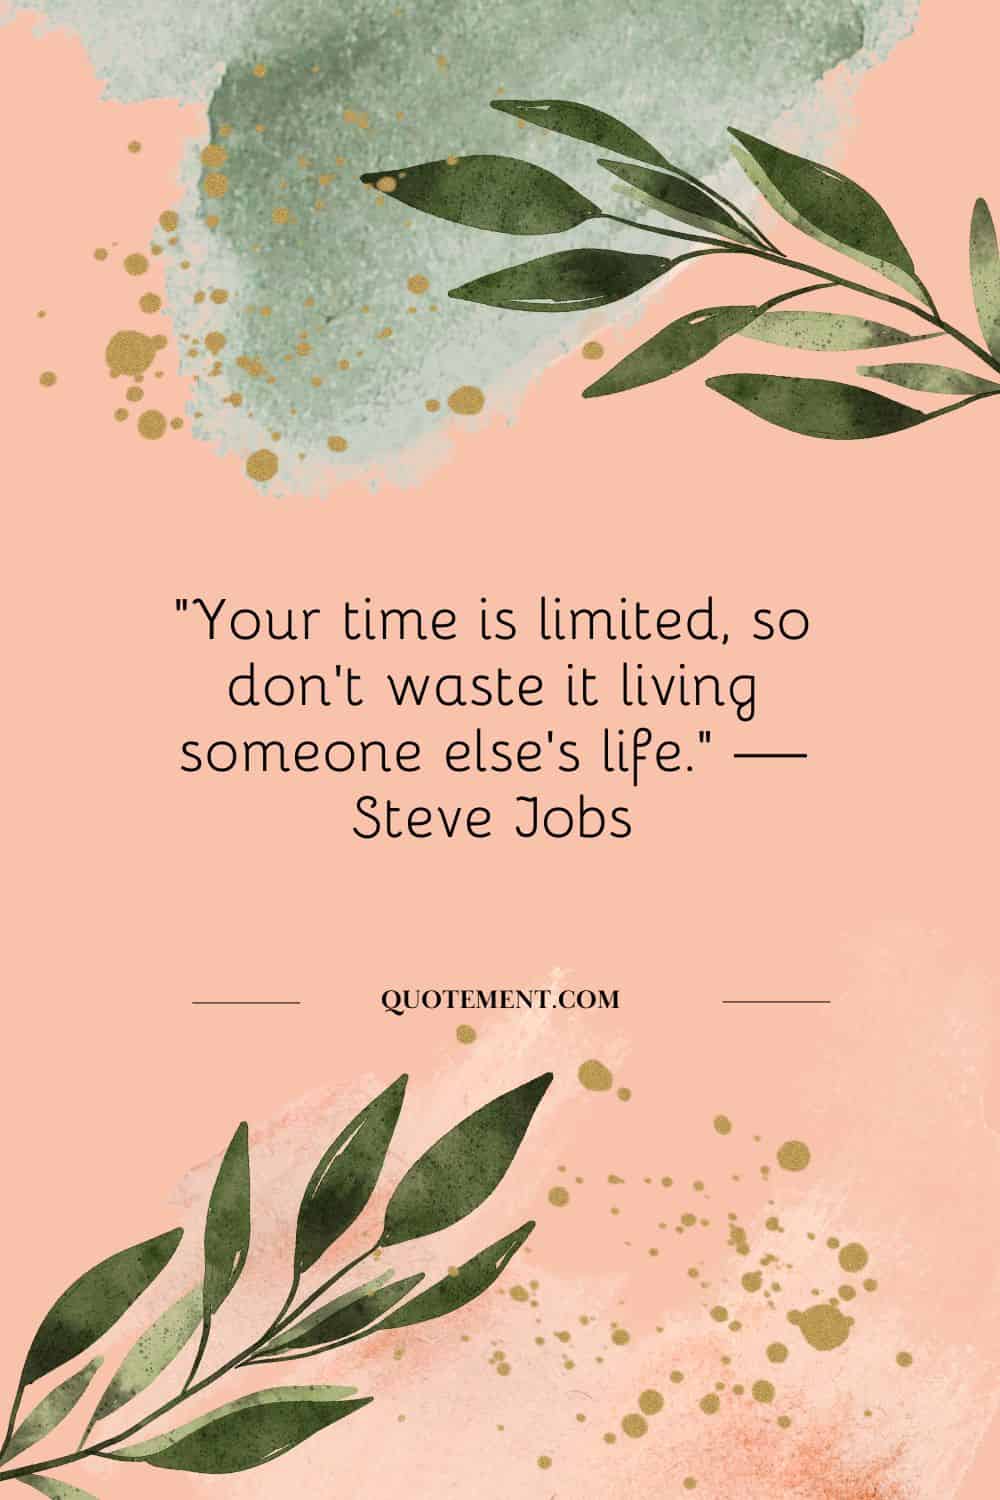 “Your time is limited, so don’t waste it living someone else’s life.” — Steve Jobs